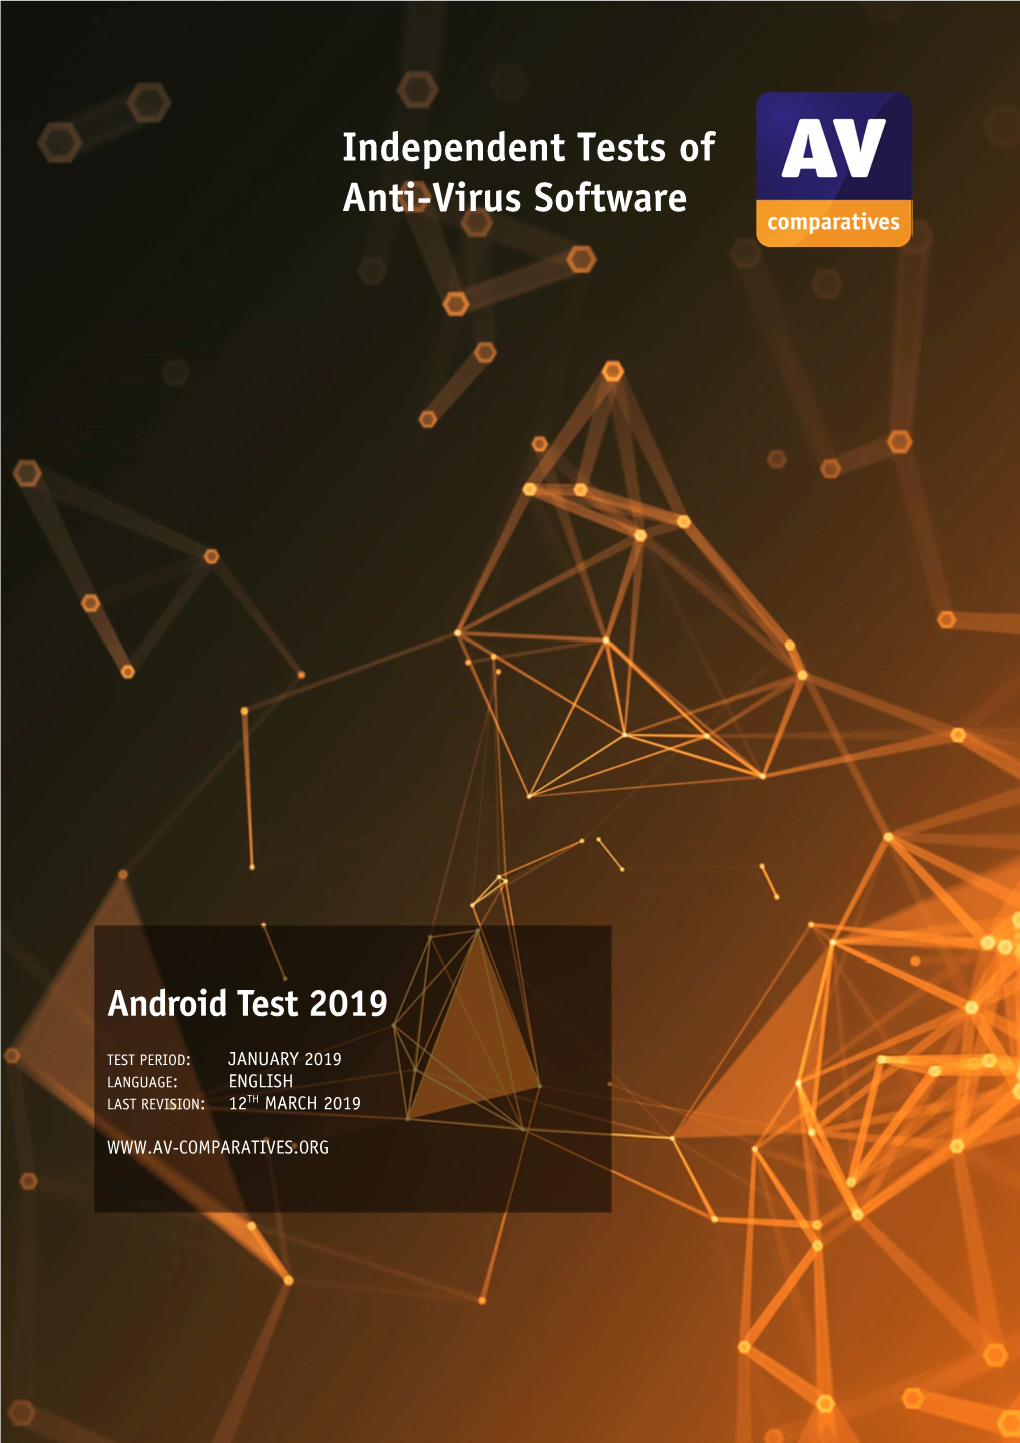 Android Test 2019